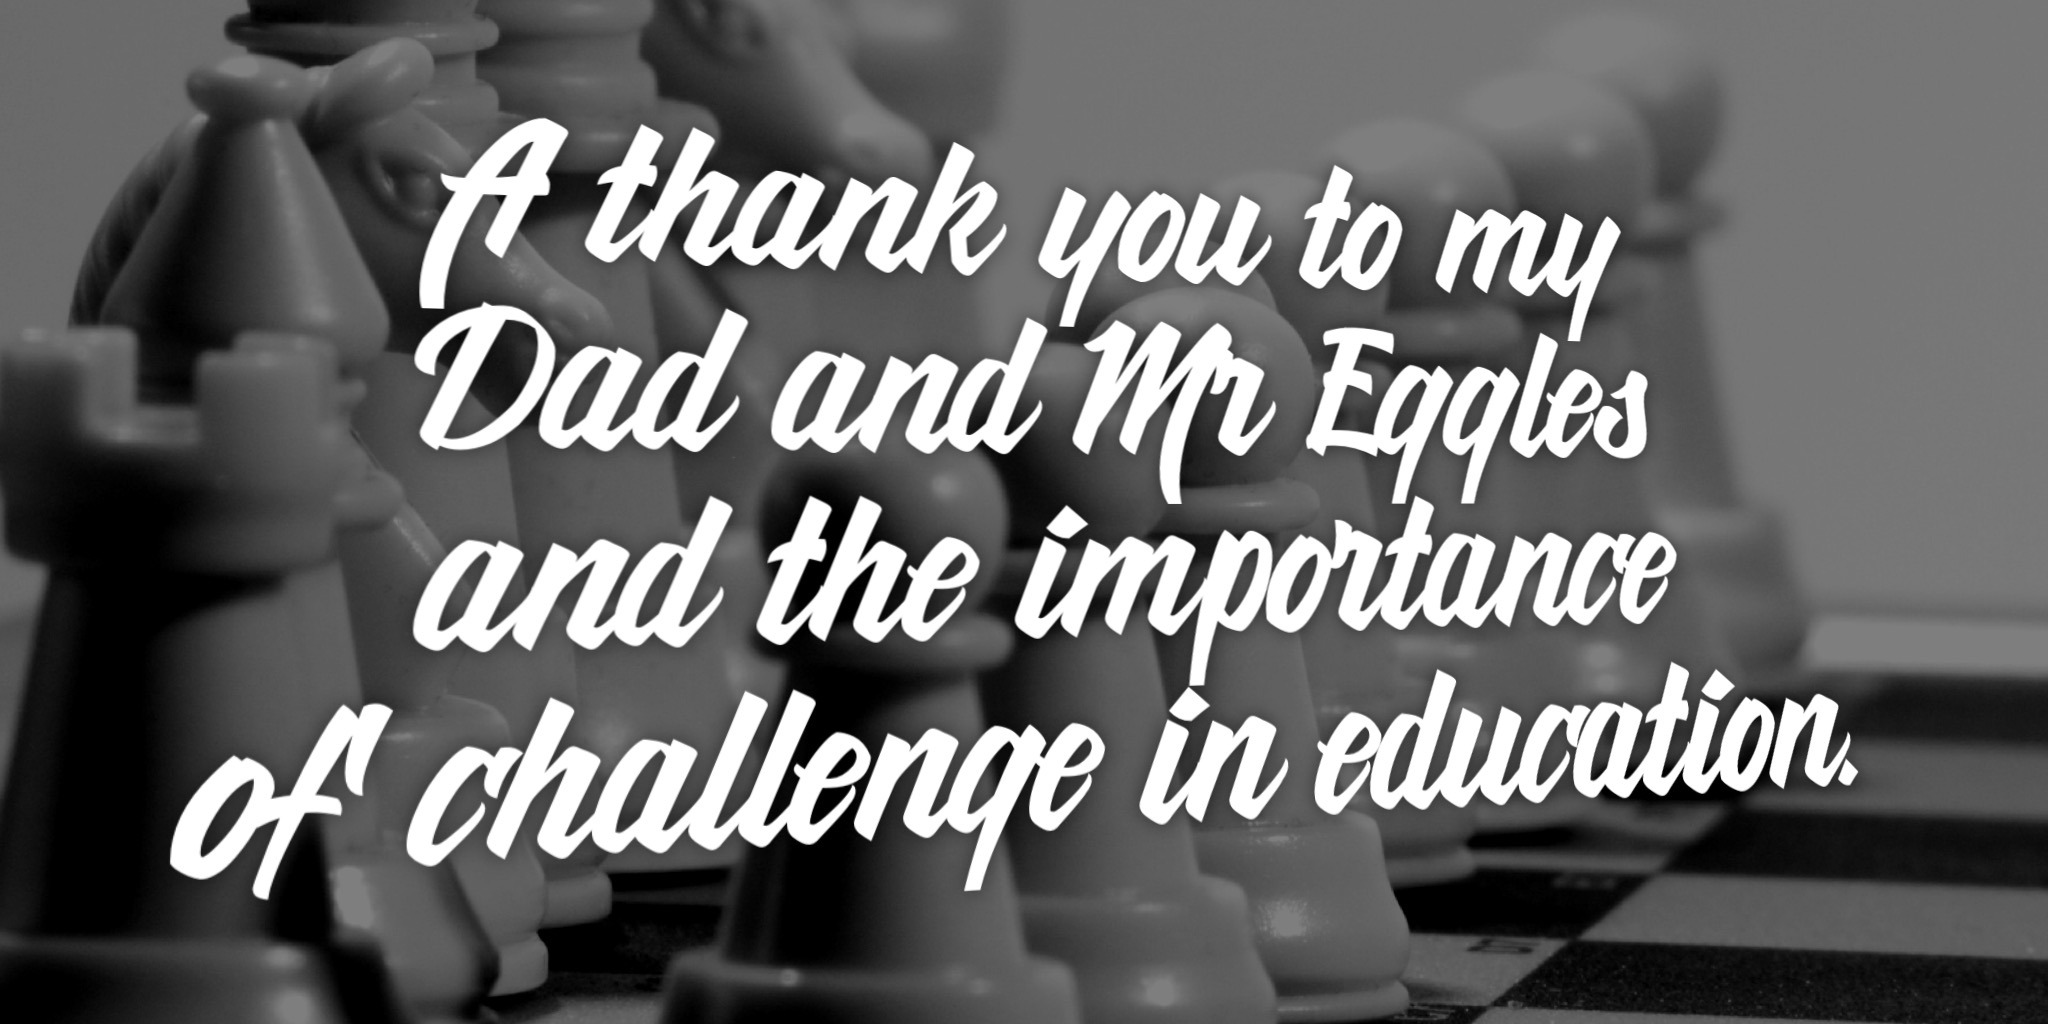 a-thank-you-to-my-dad-and-mr-eggles-and-the-importance-of-challenge-in